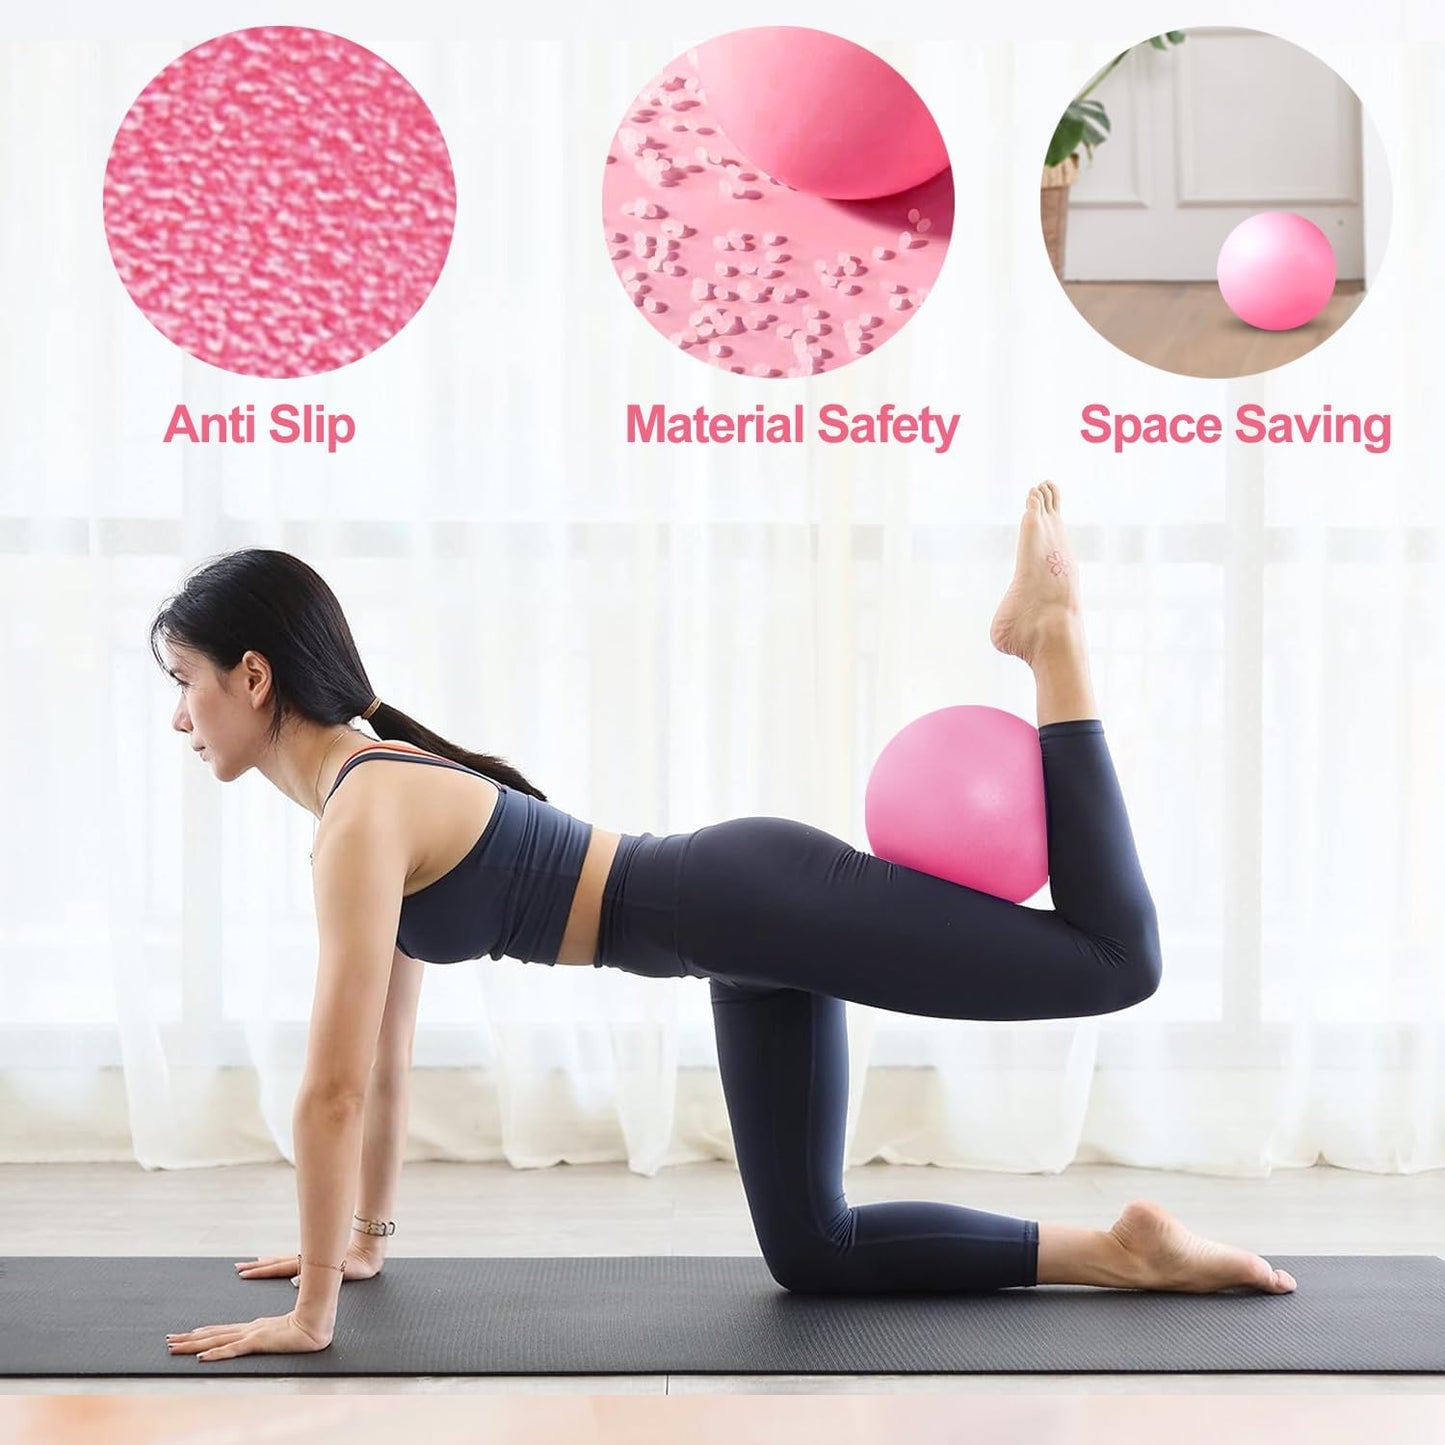 Nononfish Mini Exercise Barre Ball for Yoga,Pilates, Stability Exercise Home Workout, Core Training and Physical Therapy Small Bender Ball 9 Inch with Inflatable Straw